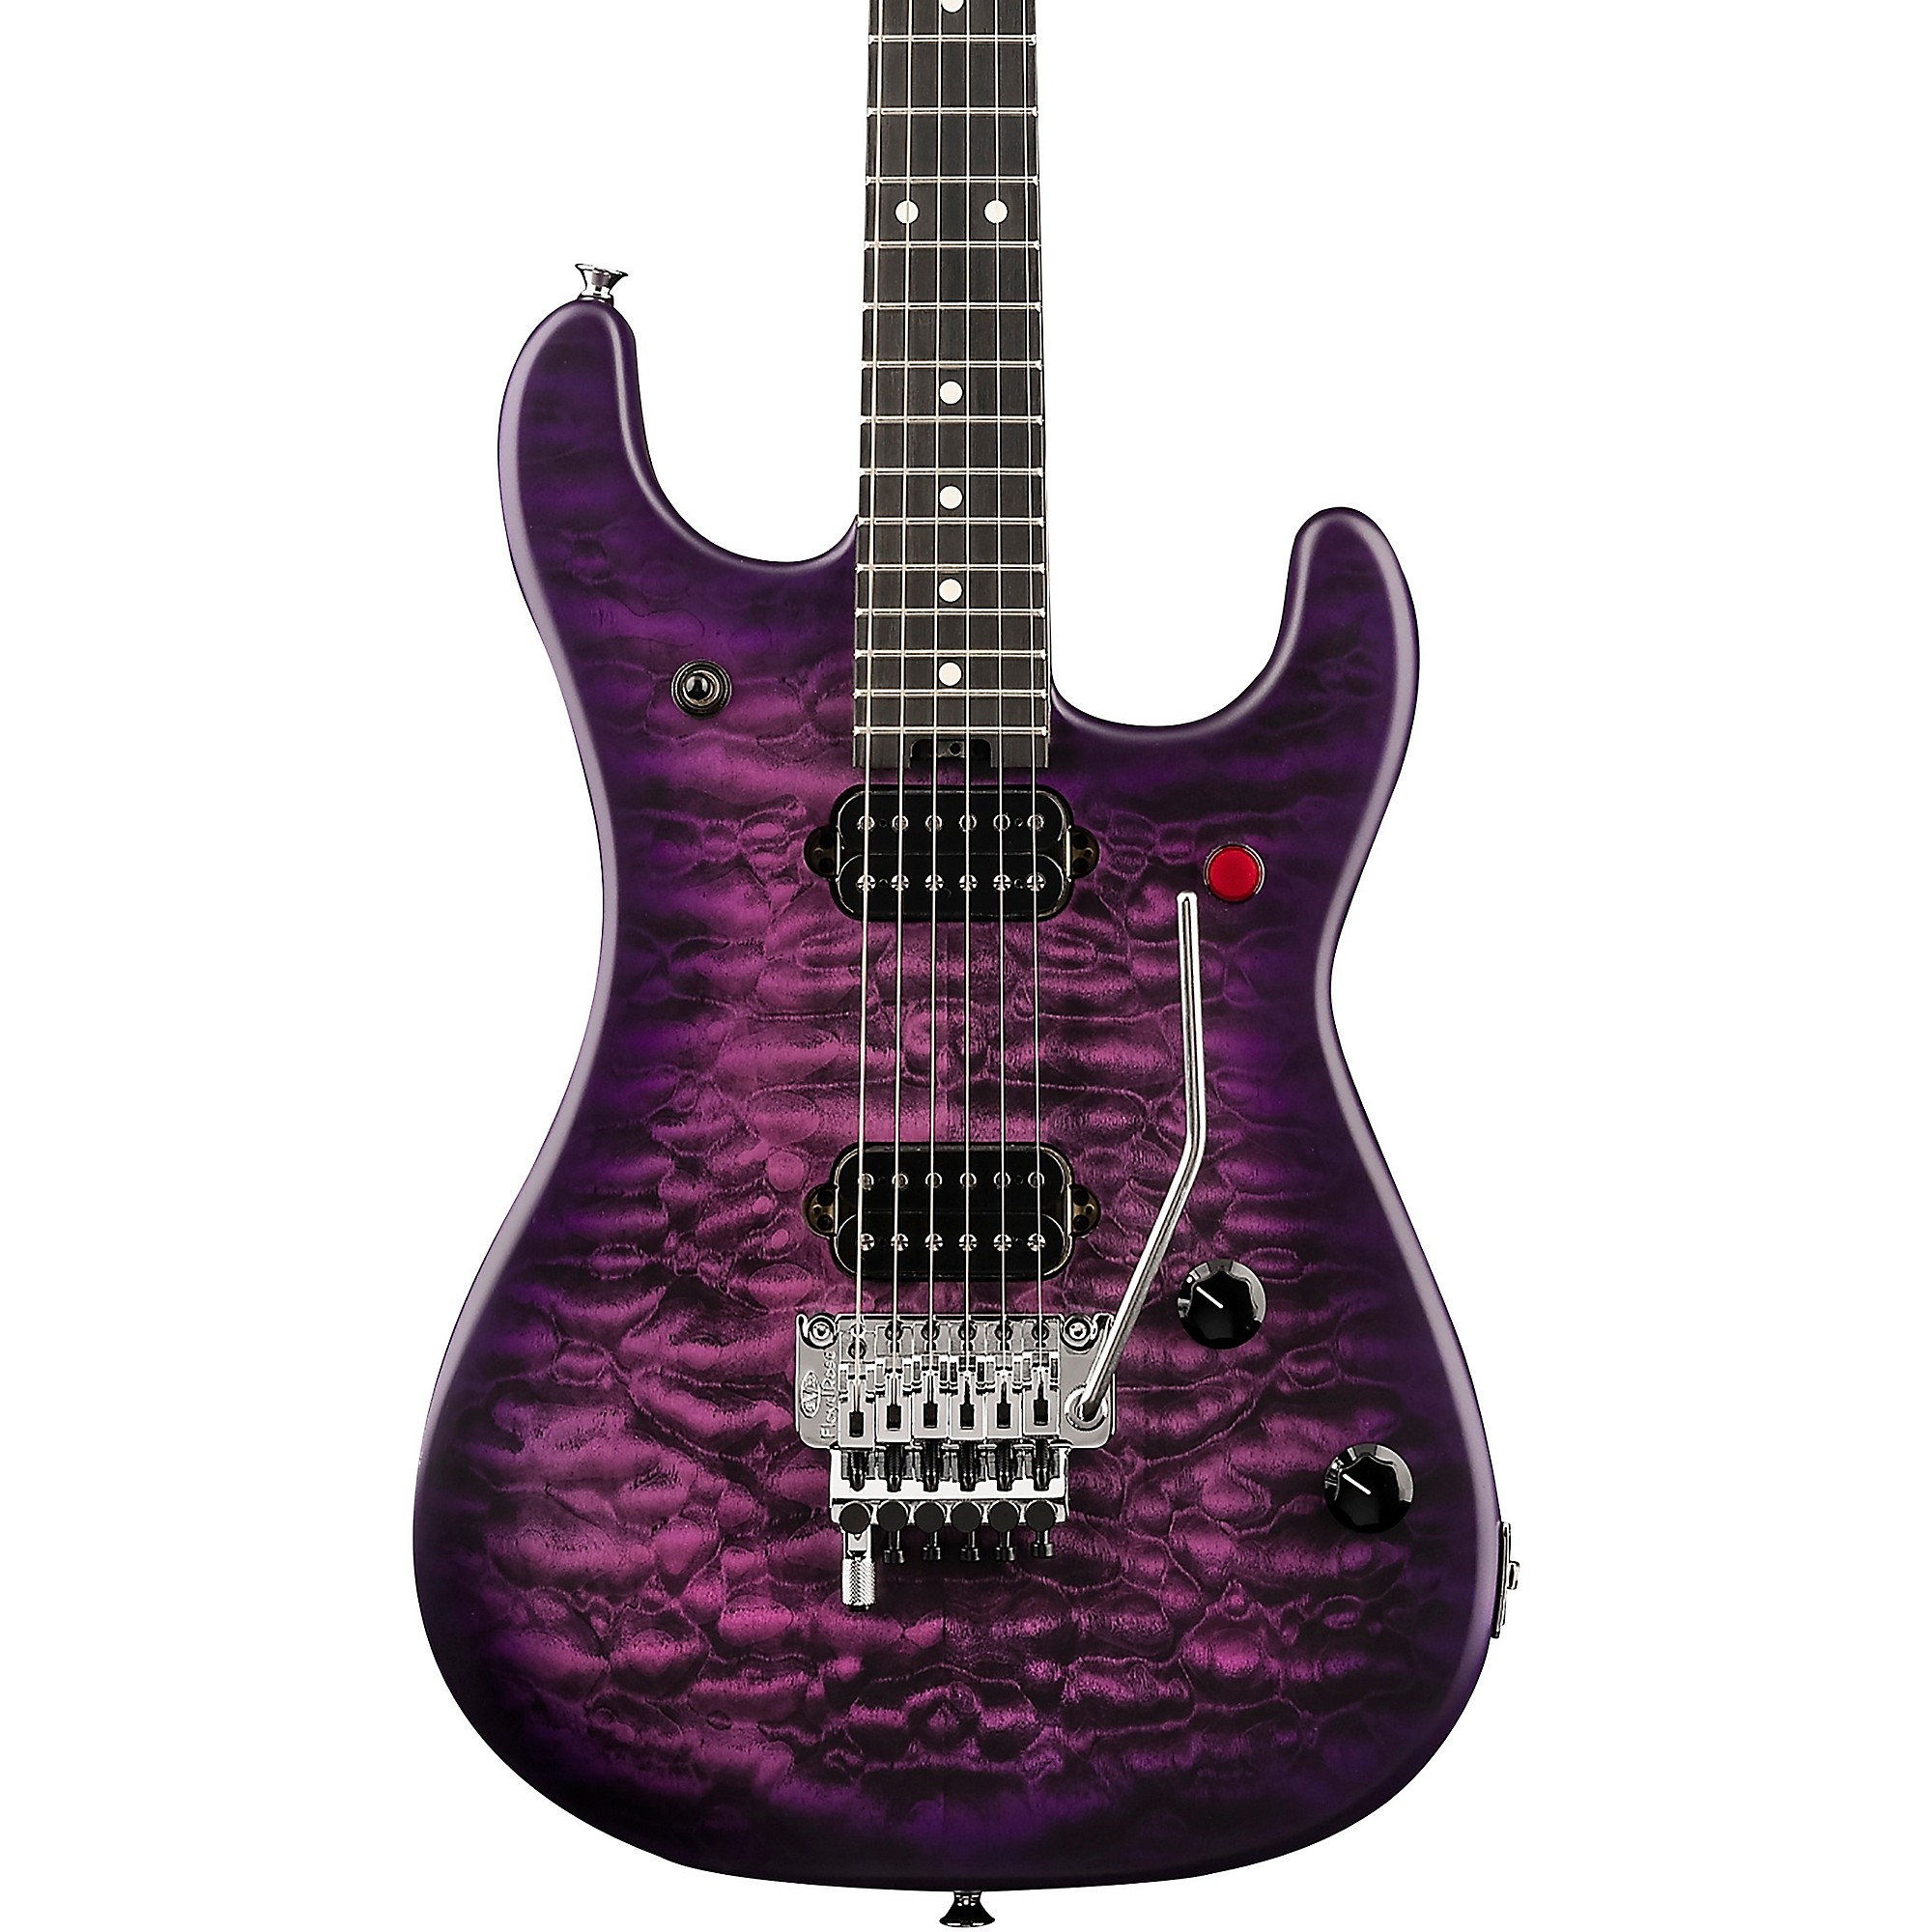 Электрогитара EVH 5150 Deluxe Poplar Burl Purple Daze электрогитара evh limited edition 5150 deluxe ash natural